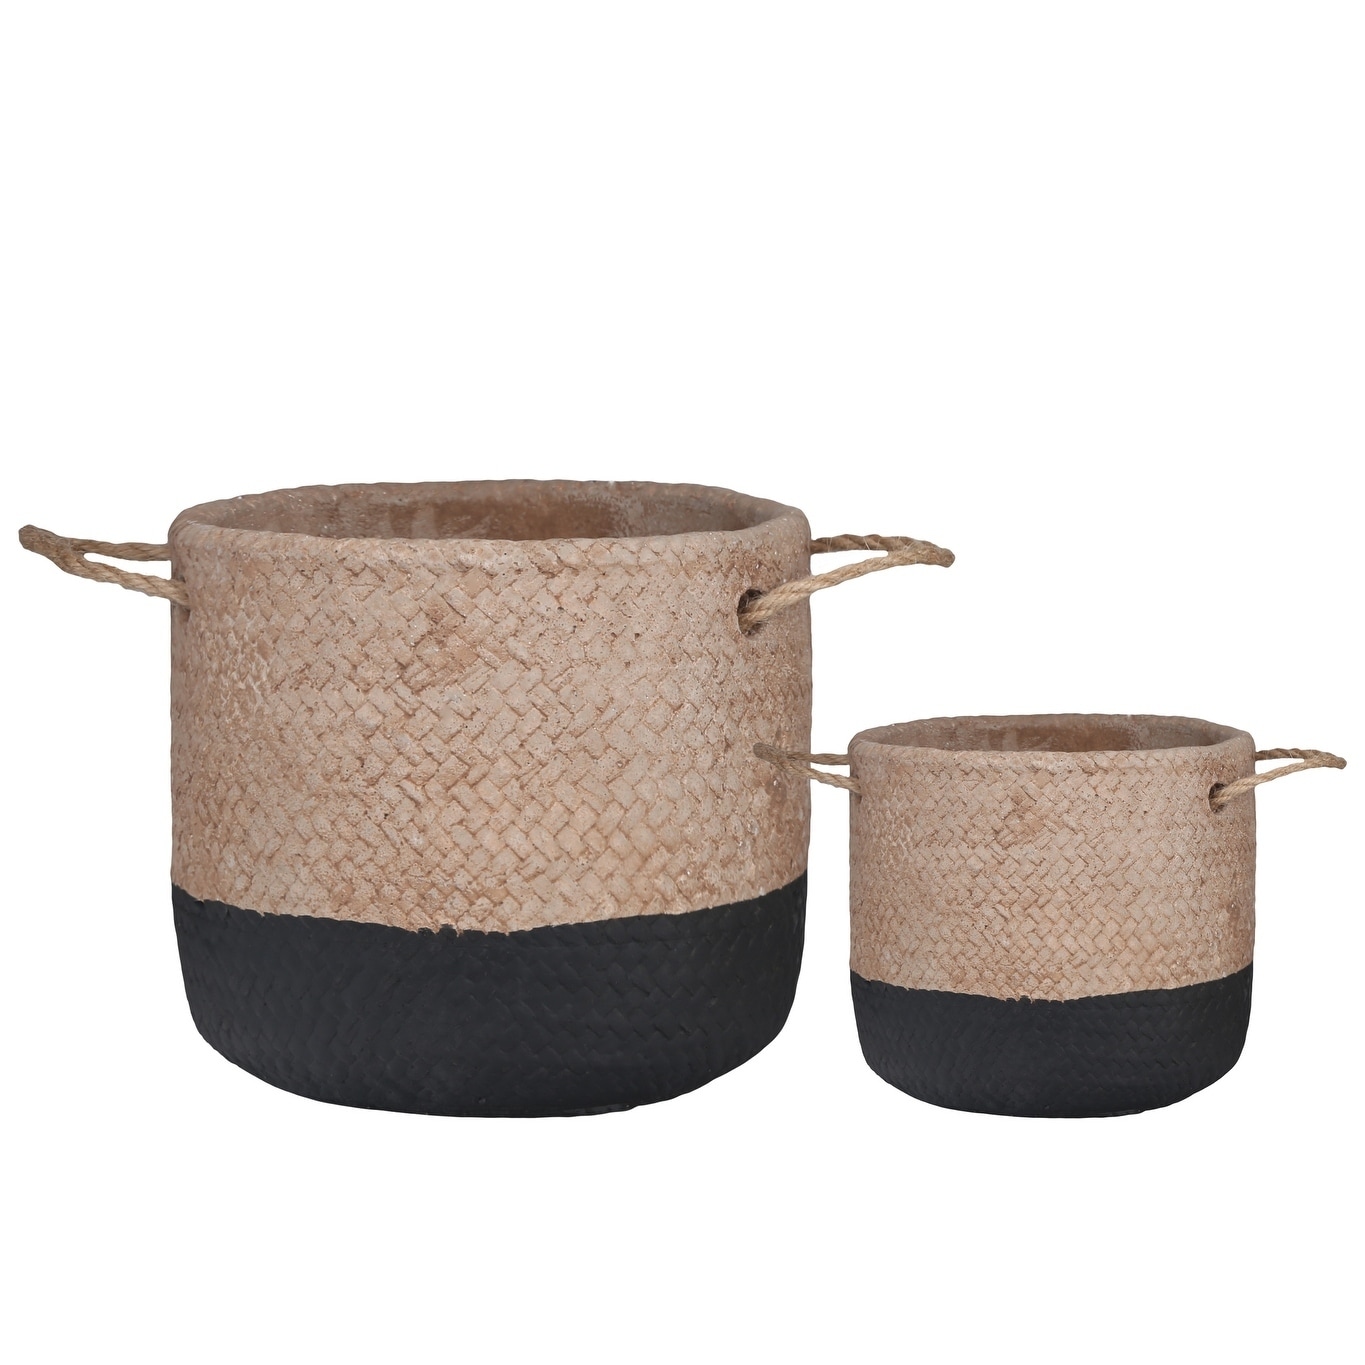 Round Cement Basket with Rope Handles, Large, Set of 2, Black and Brown